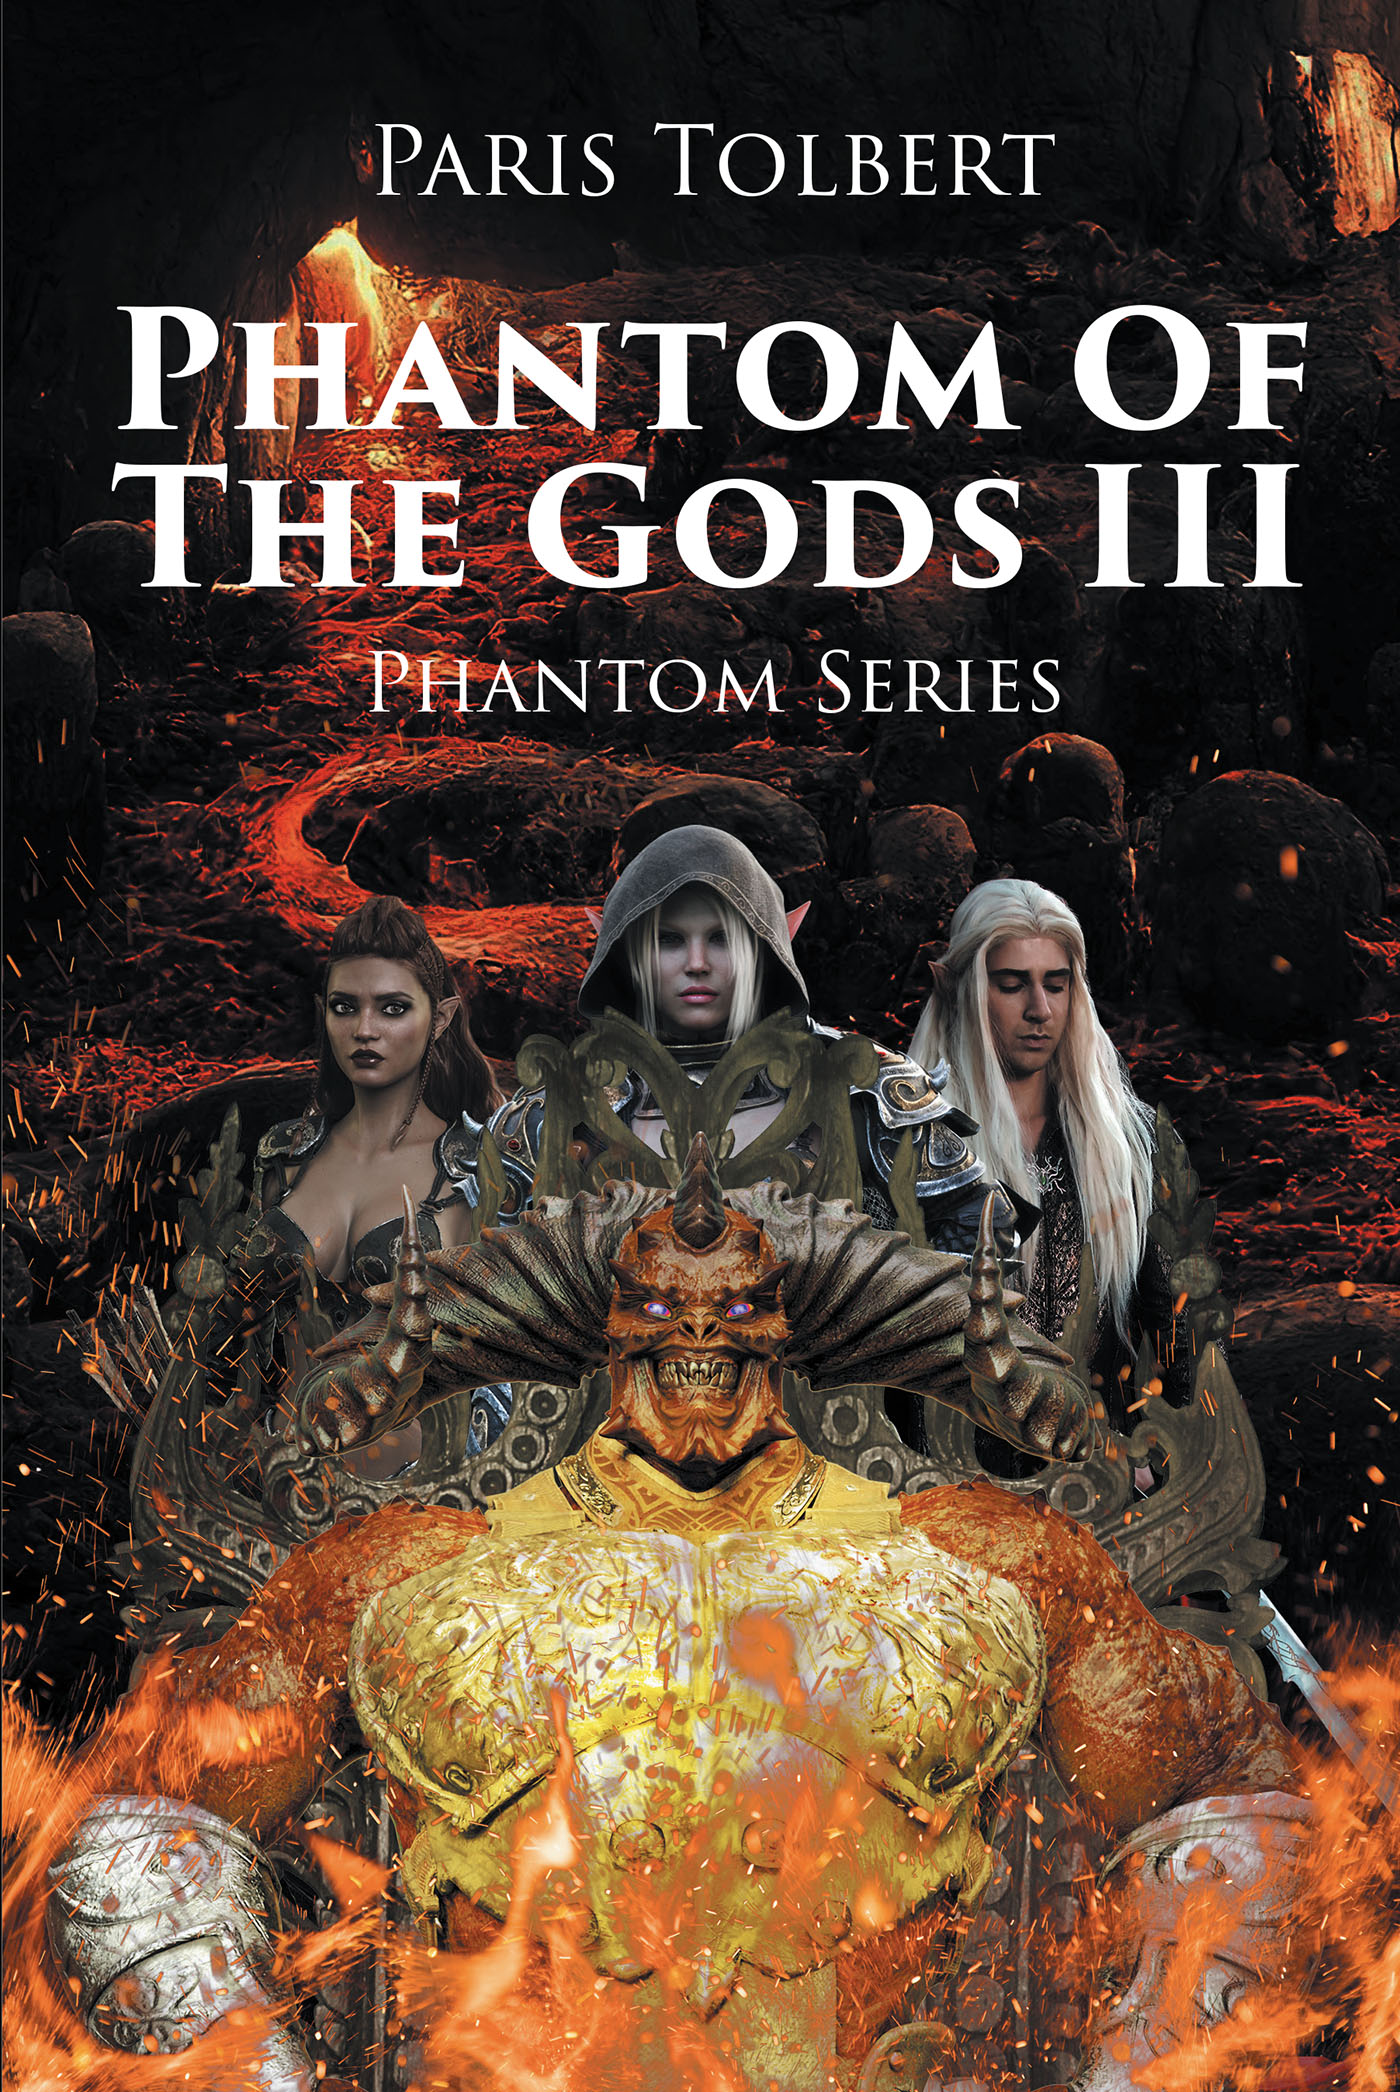 Author Paris Tolbert’s New Book, “Phantom of the Gods III,” is a Spell-Binding Fantasy Story Set in a World Where Terror Now Reigns Thanks to the Return of the Dark Lord